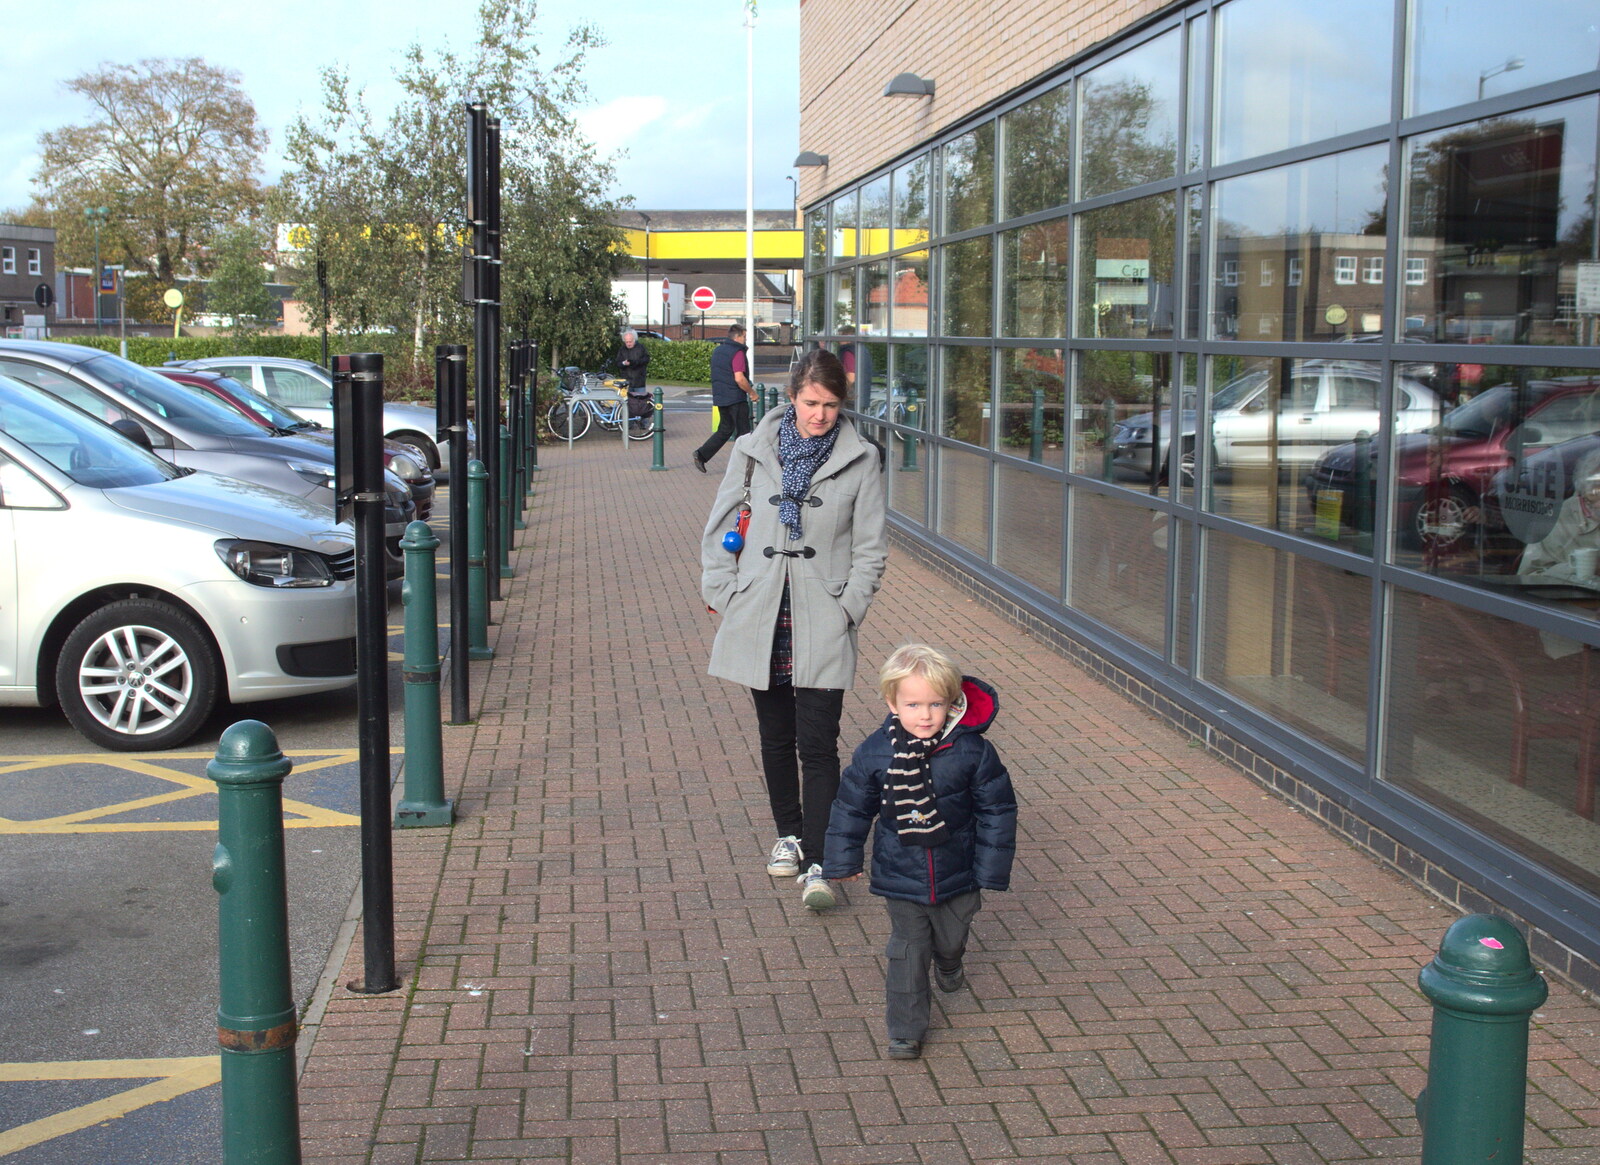 Isobel and Harry by Morrisons from A Saturday in Town, Diss, Norfolk - 8th November 2014